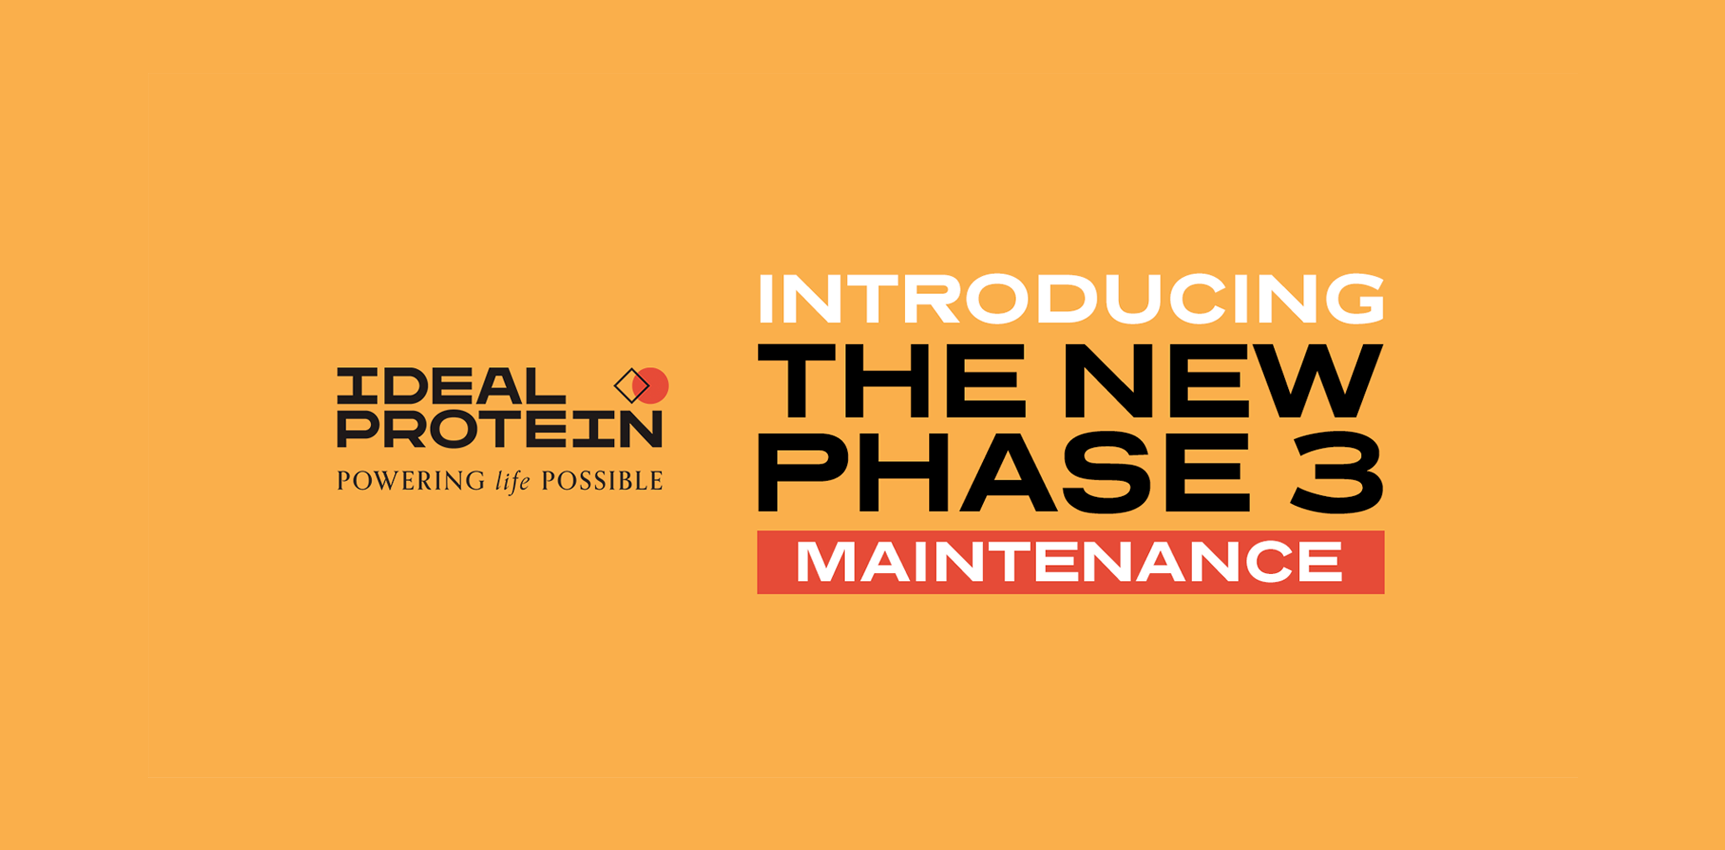 new phase 3 ideal protein